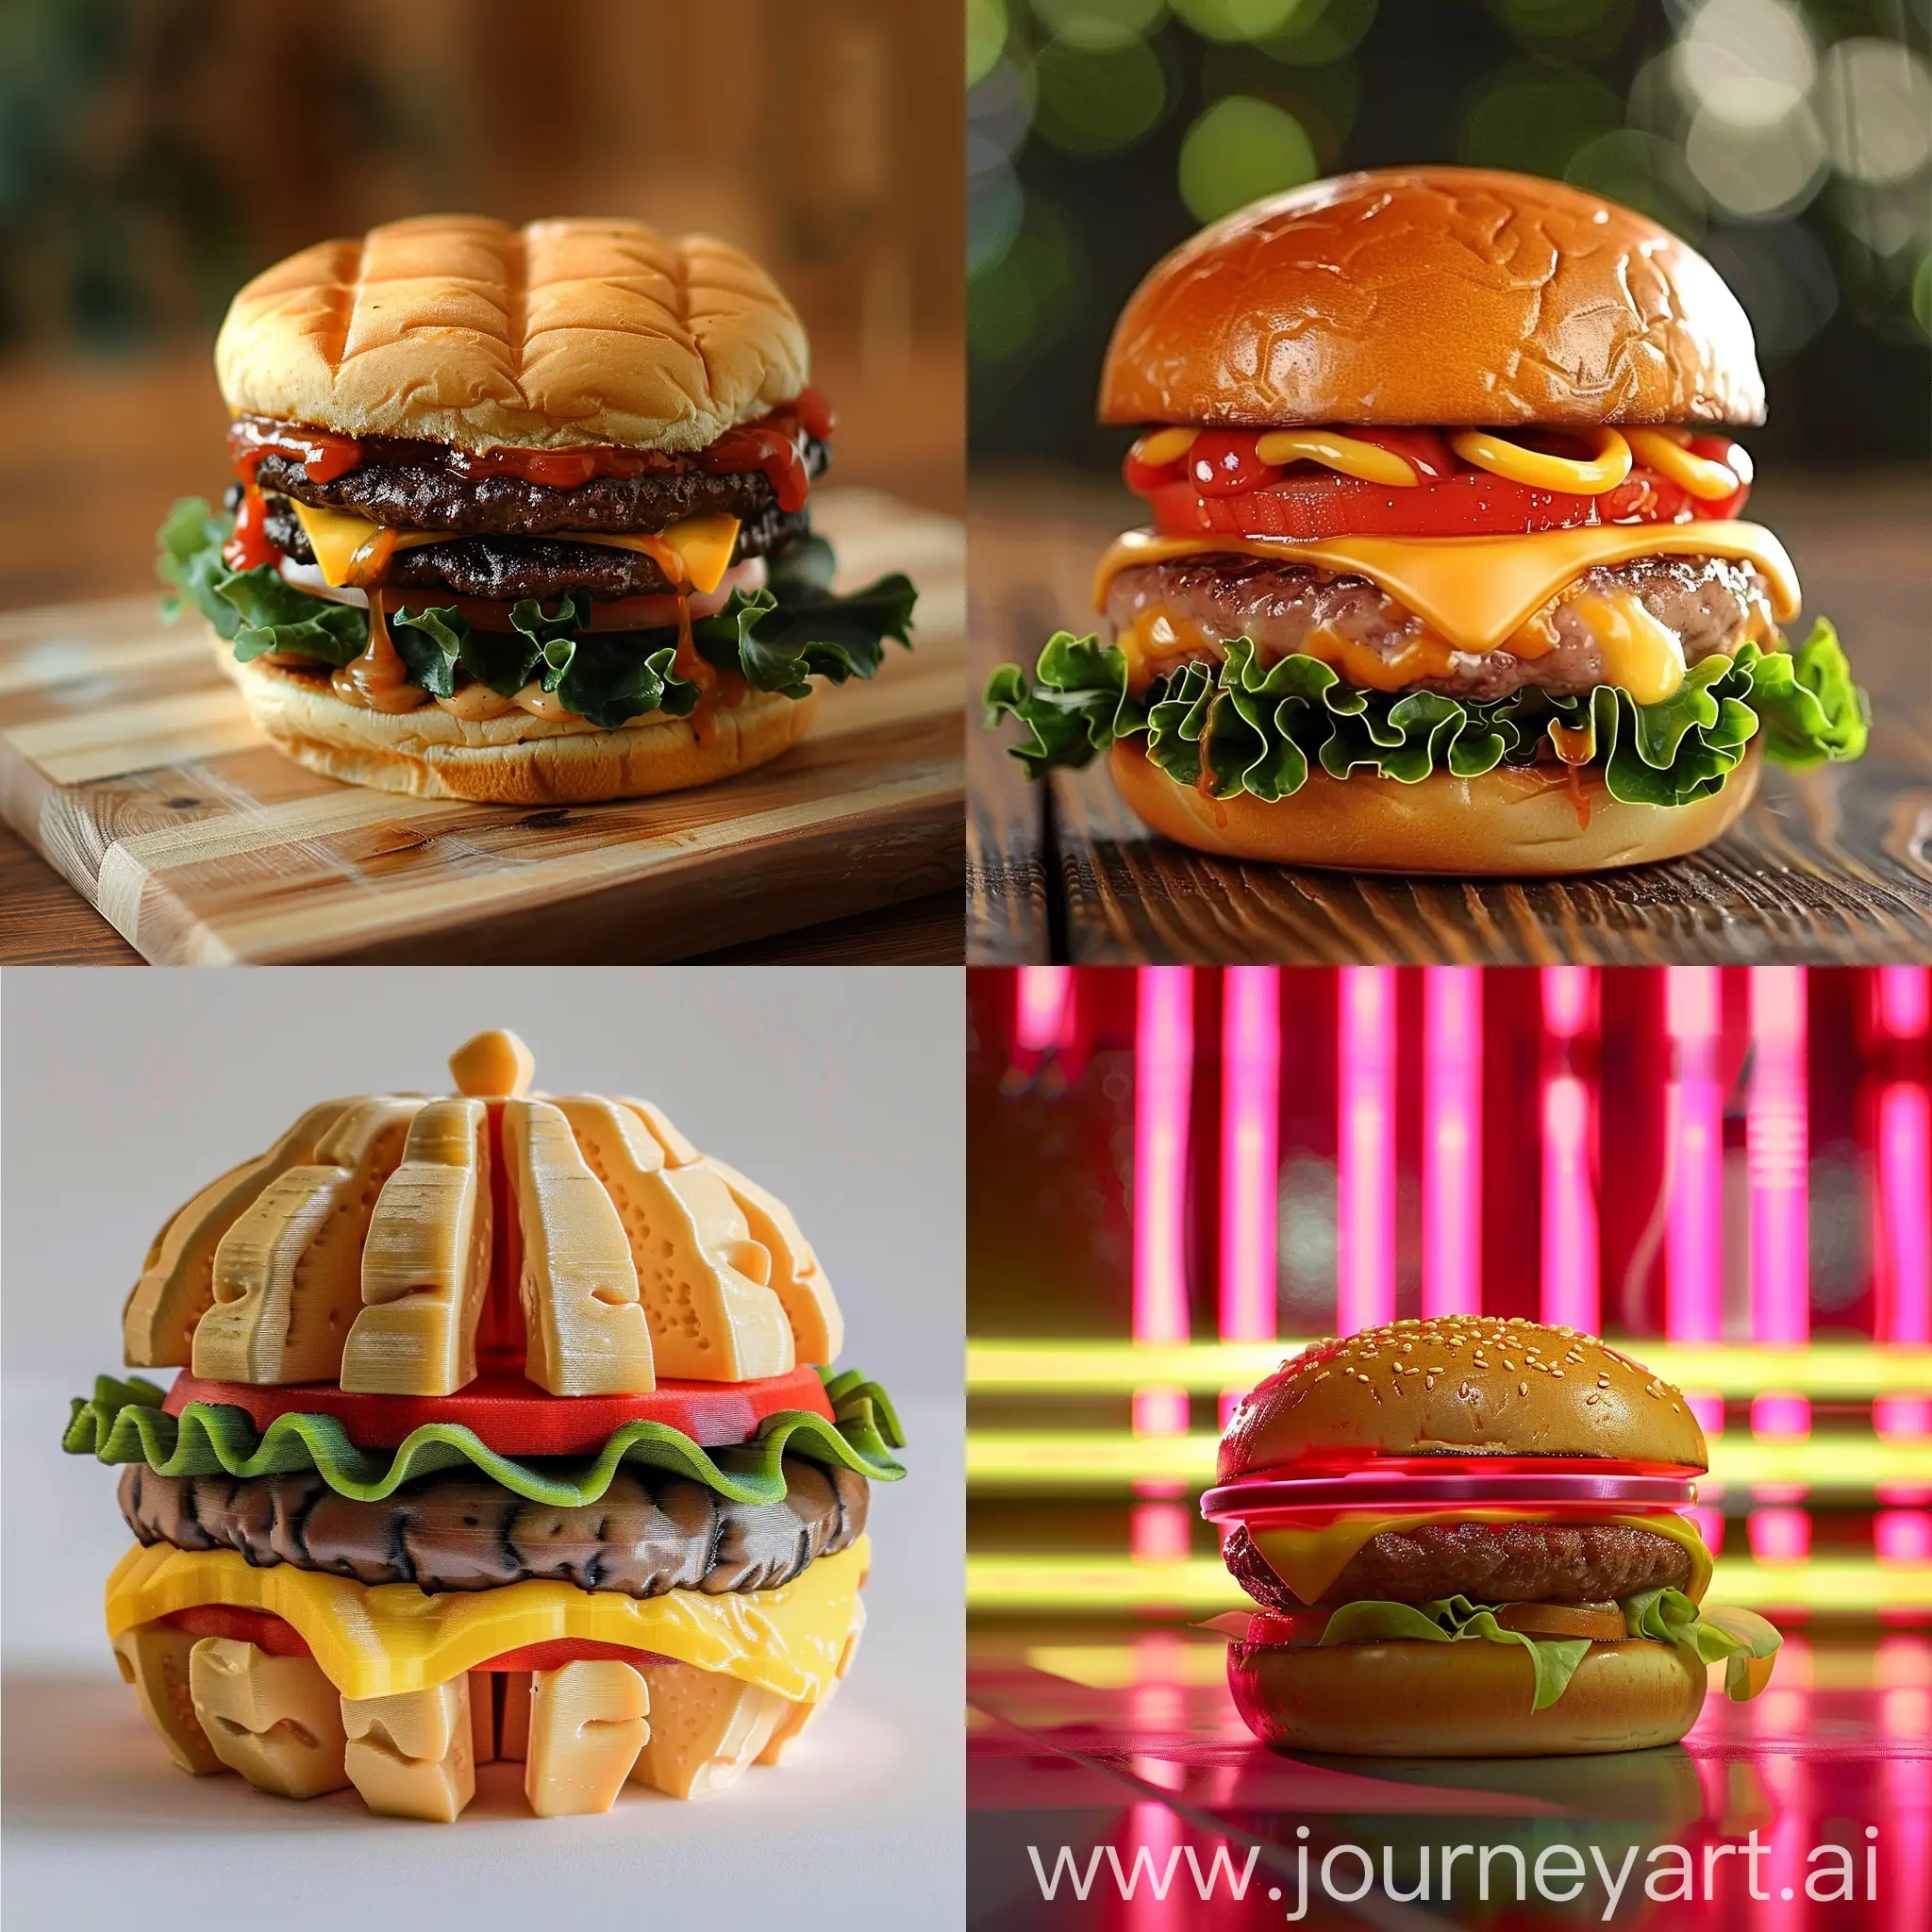 BURGER FROM THE FUTURE CREATED BY HIGH TECHNOLOGYS LIEK 3D PRINTER AND MORE